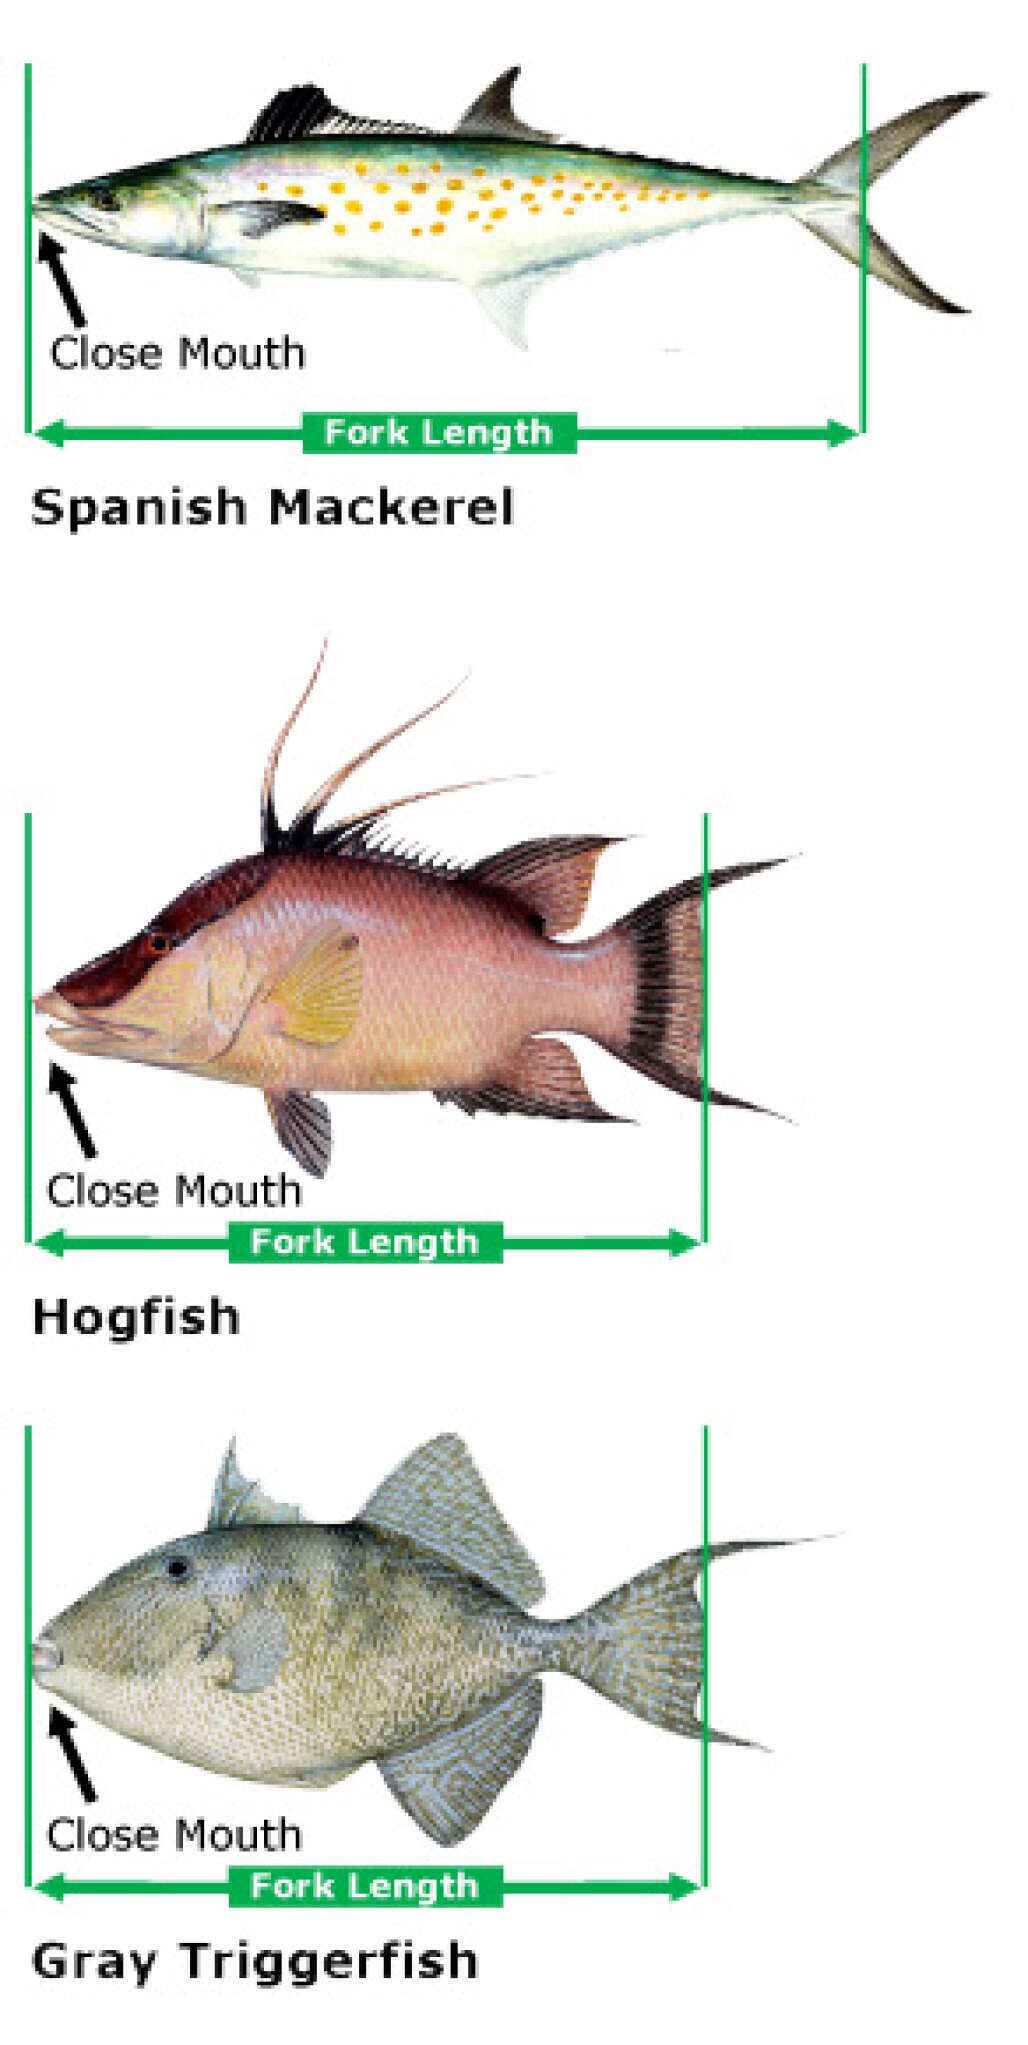 Fishing Tips - How to Measure Fish